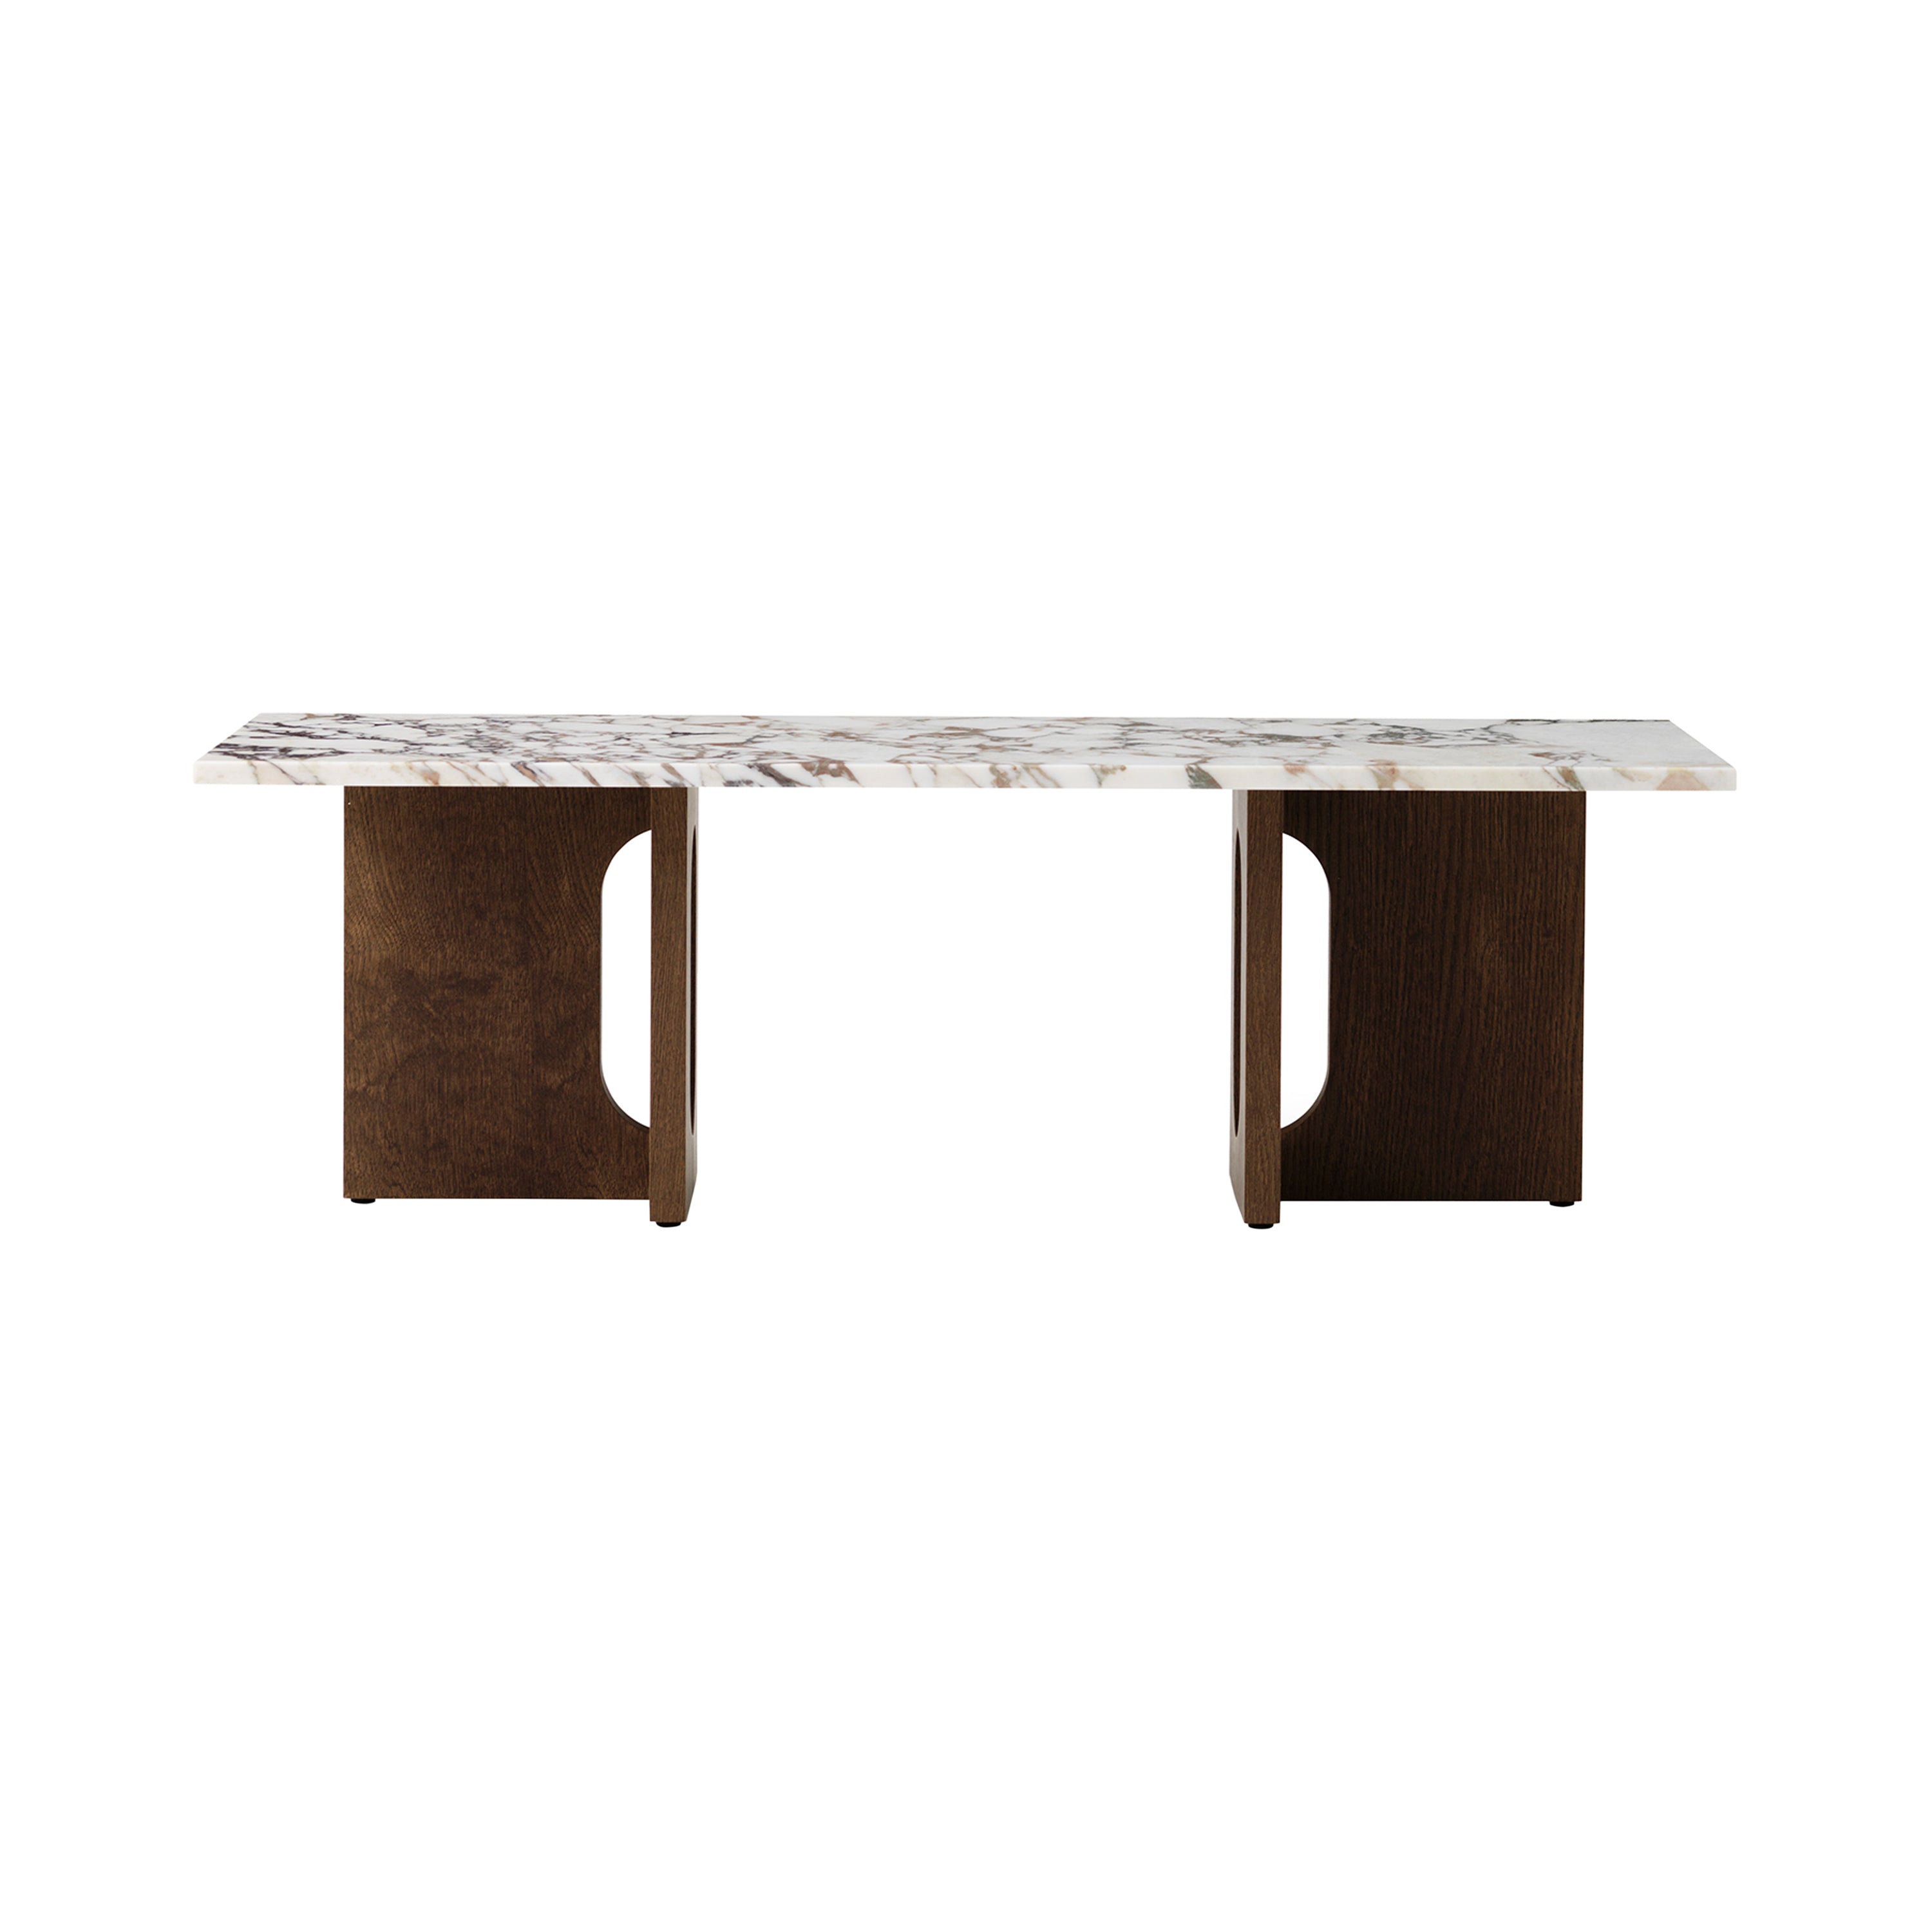 Androgyne Lounge Table: Calacatta Viola Marble + Dark Stained Oak